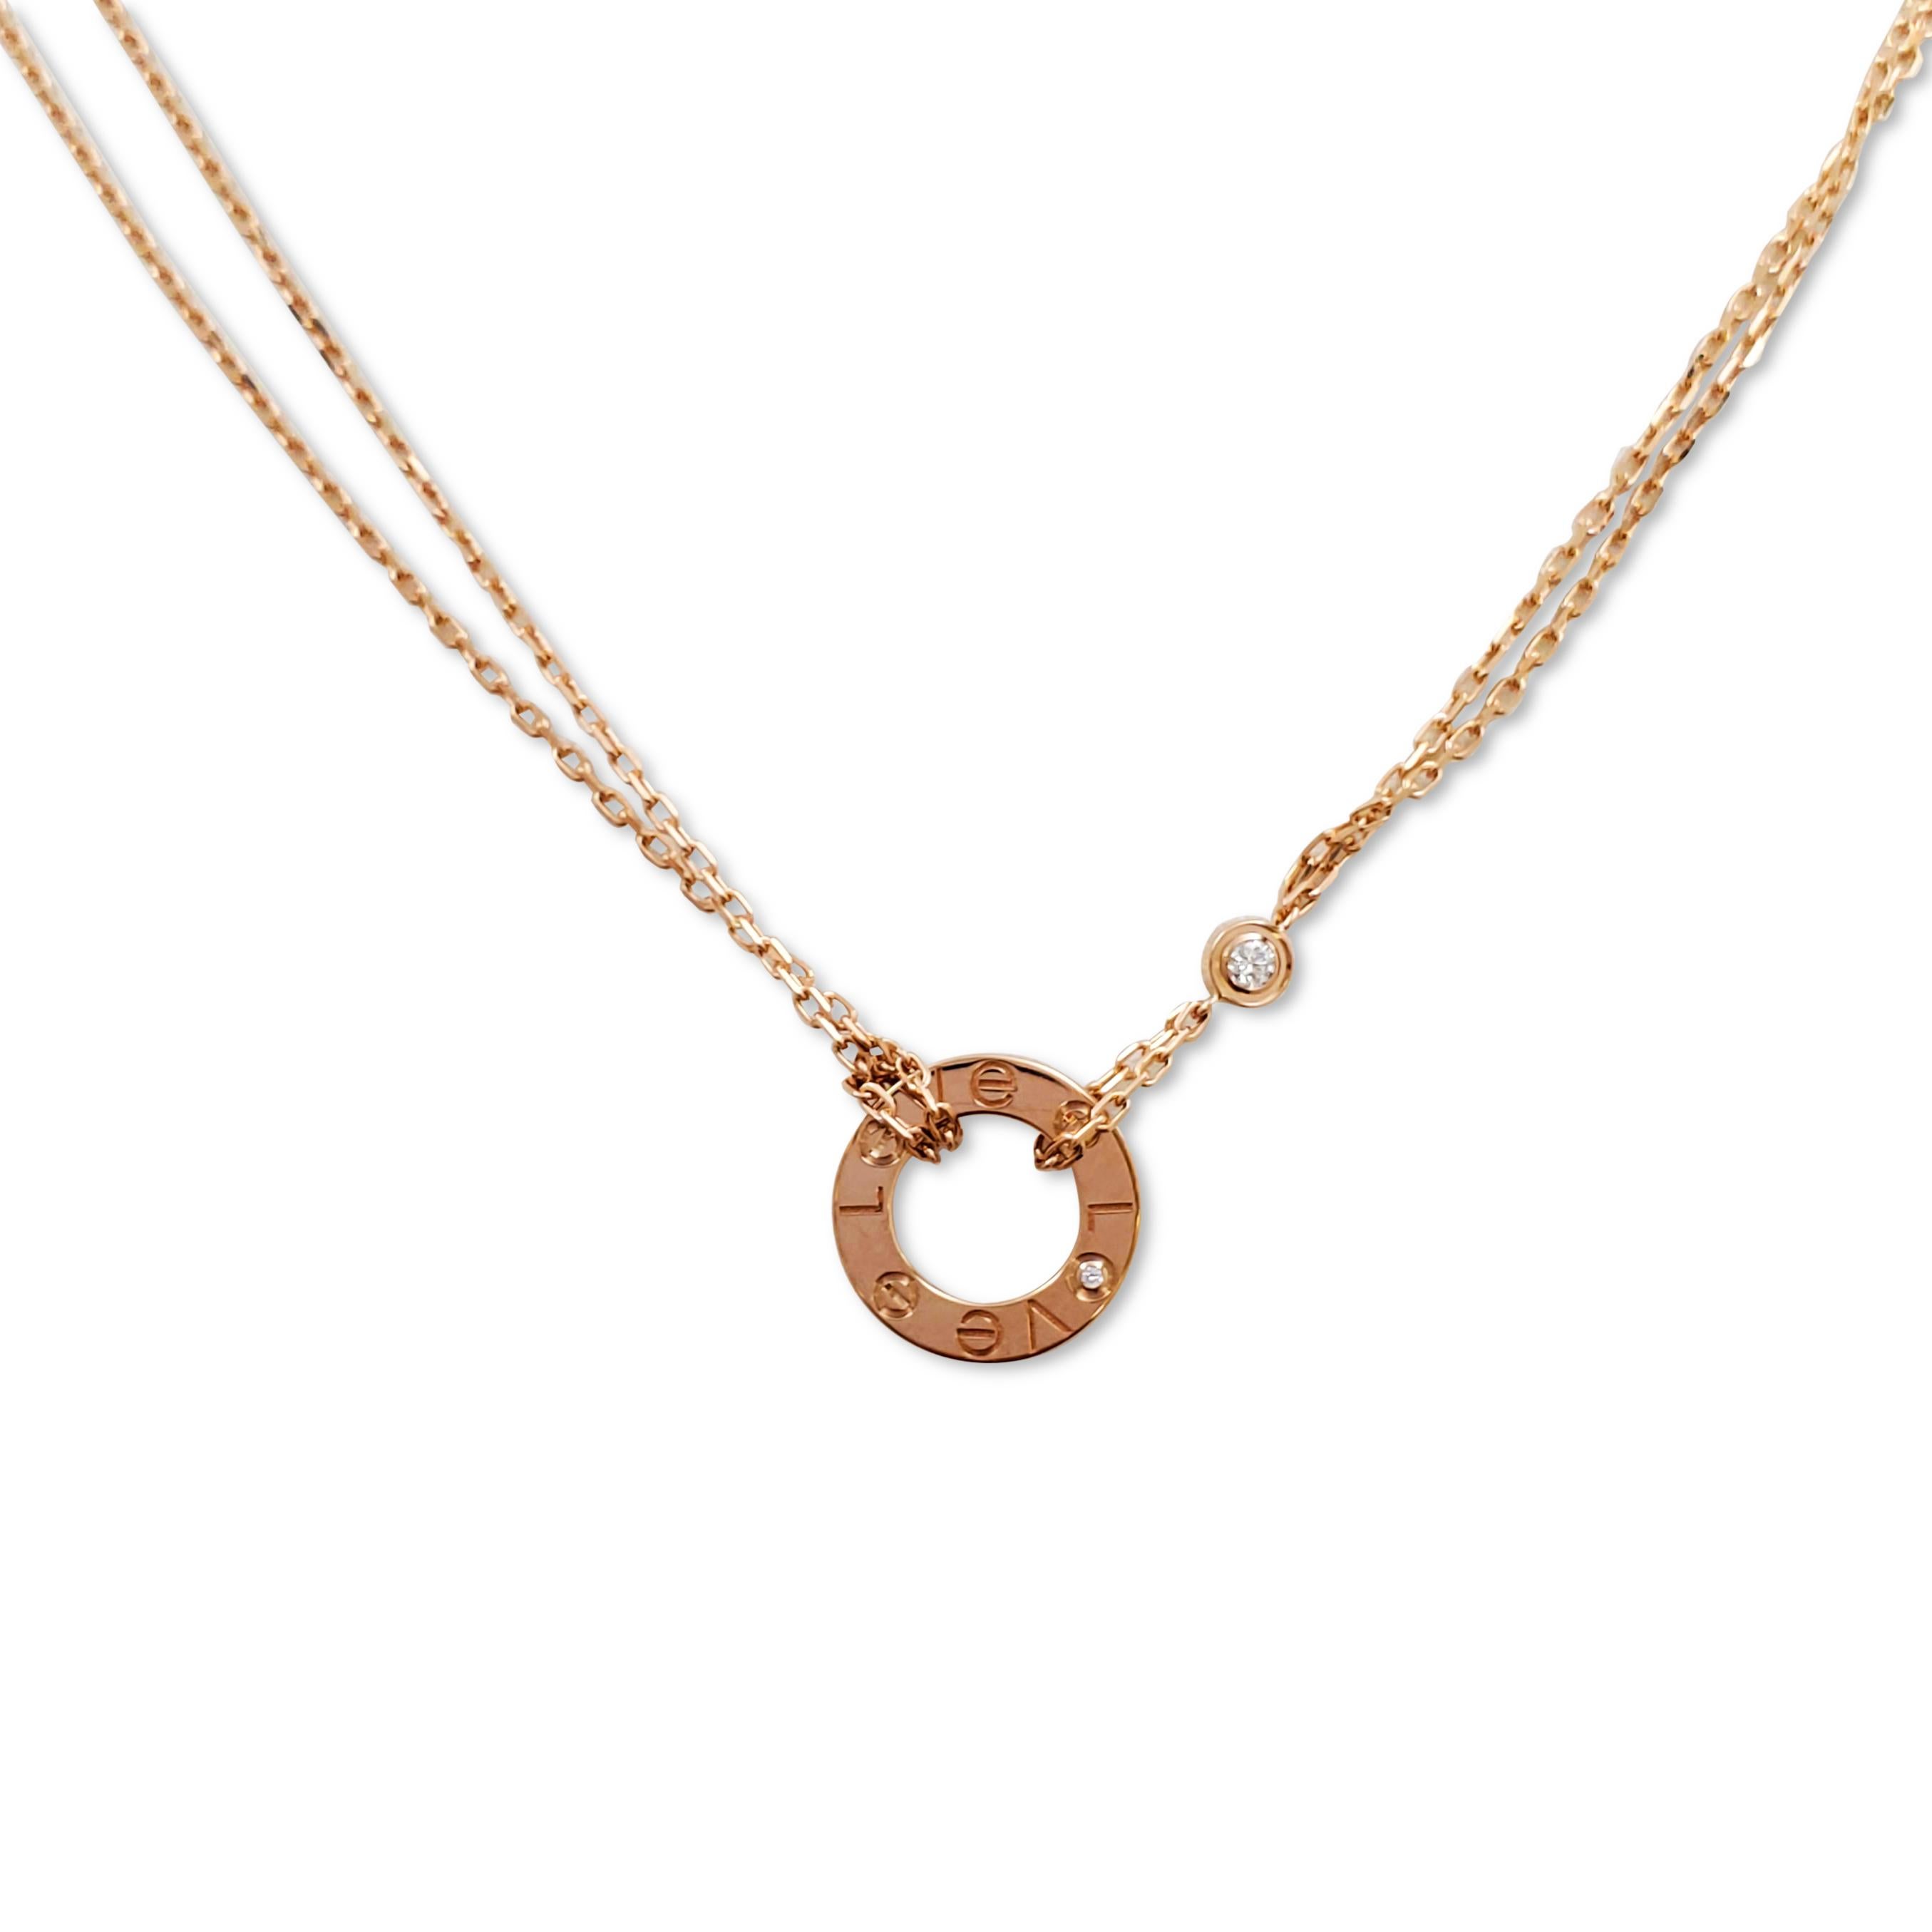 Authentic chain and ring charm necklace from the Cartier 'Love' collection. Crafted in 18 karat rose gold, the double-strand oval-link adjustable chain features a half-inch round ring and screw top motifs set with two round brilliant cut diamonds of